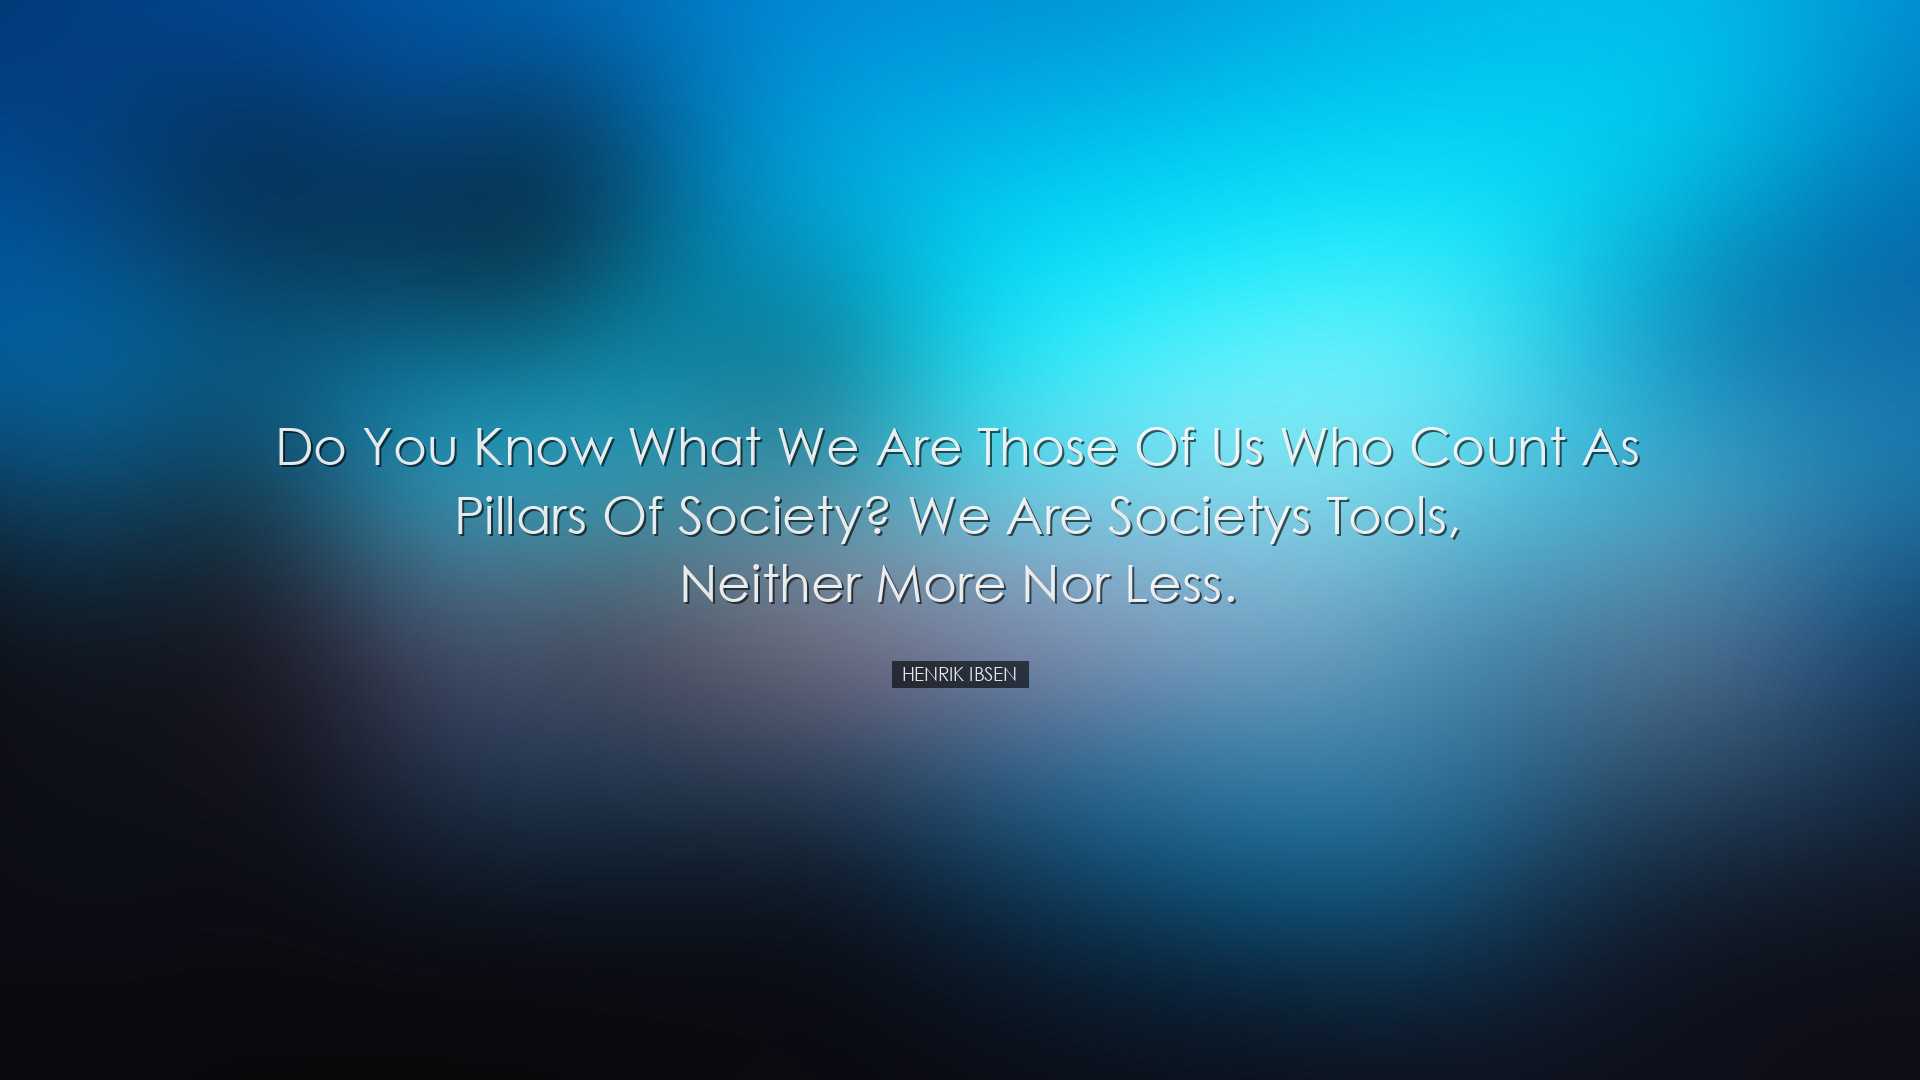 Do you know what we are those of us who count as pillars of societ